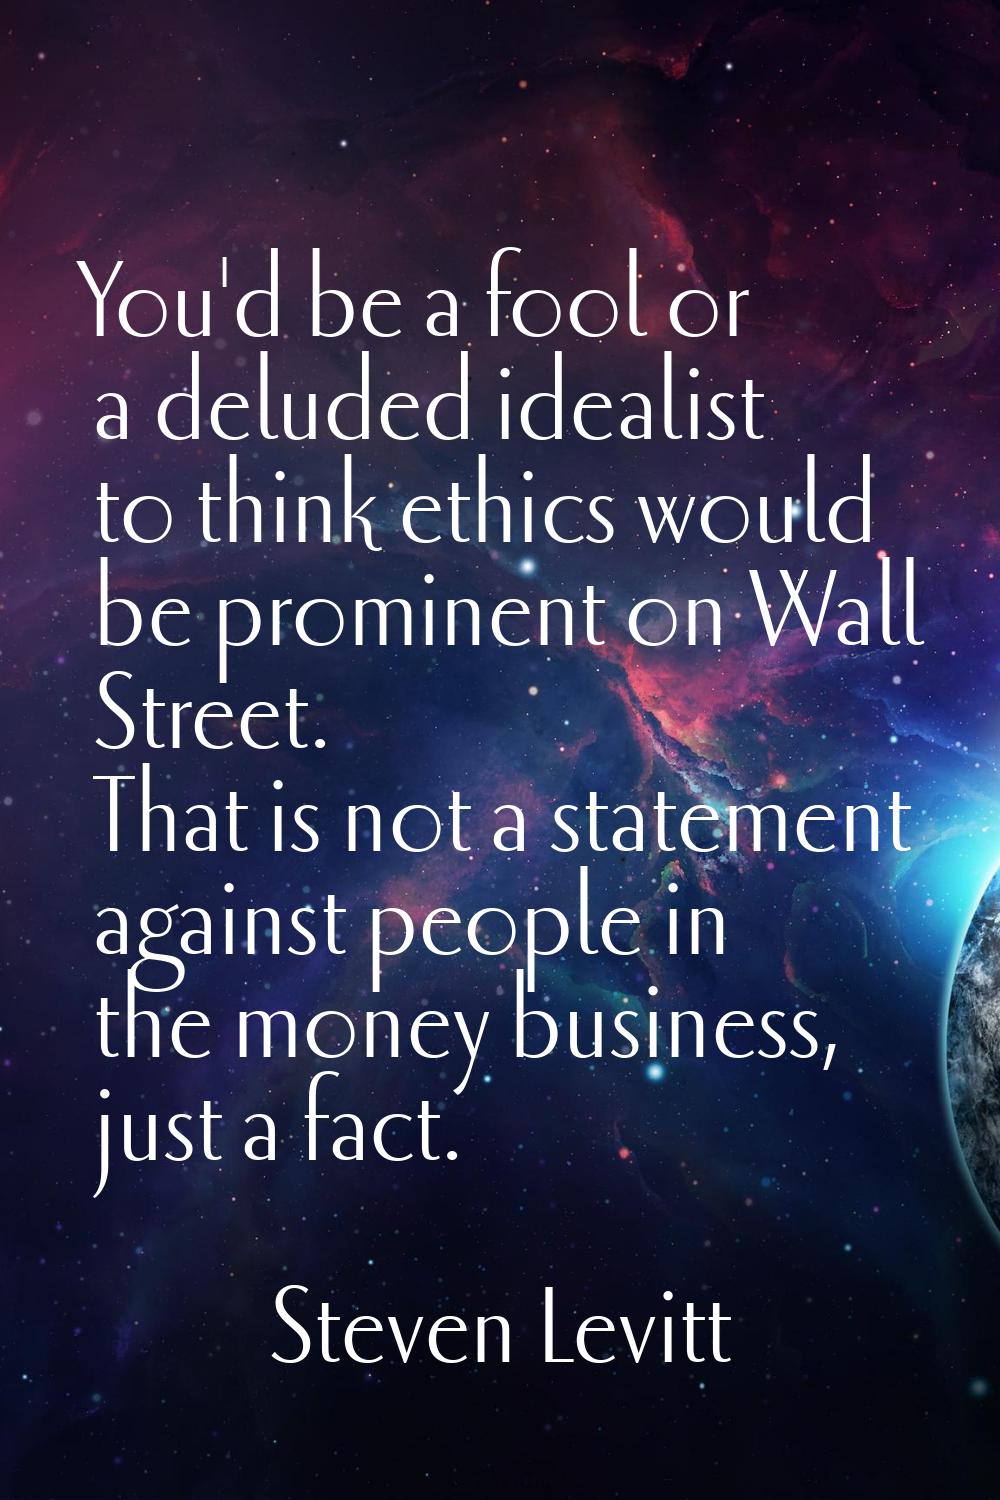 You'd be a fool or a deluded idealist to think ethics would be prominent on Wall Street. That is no